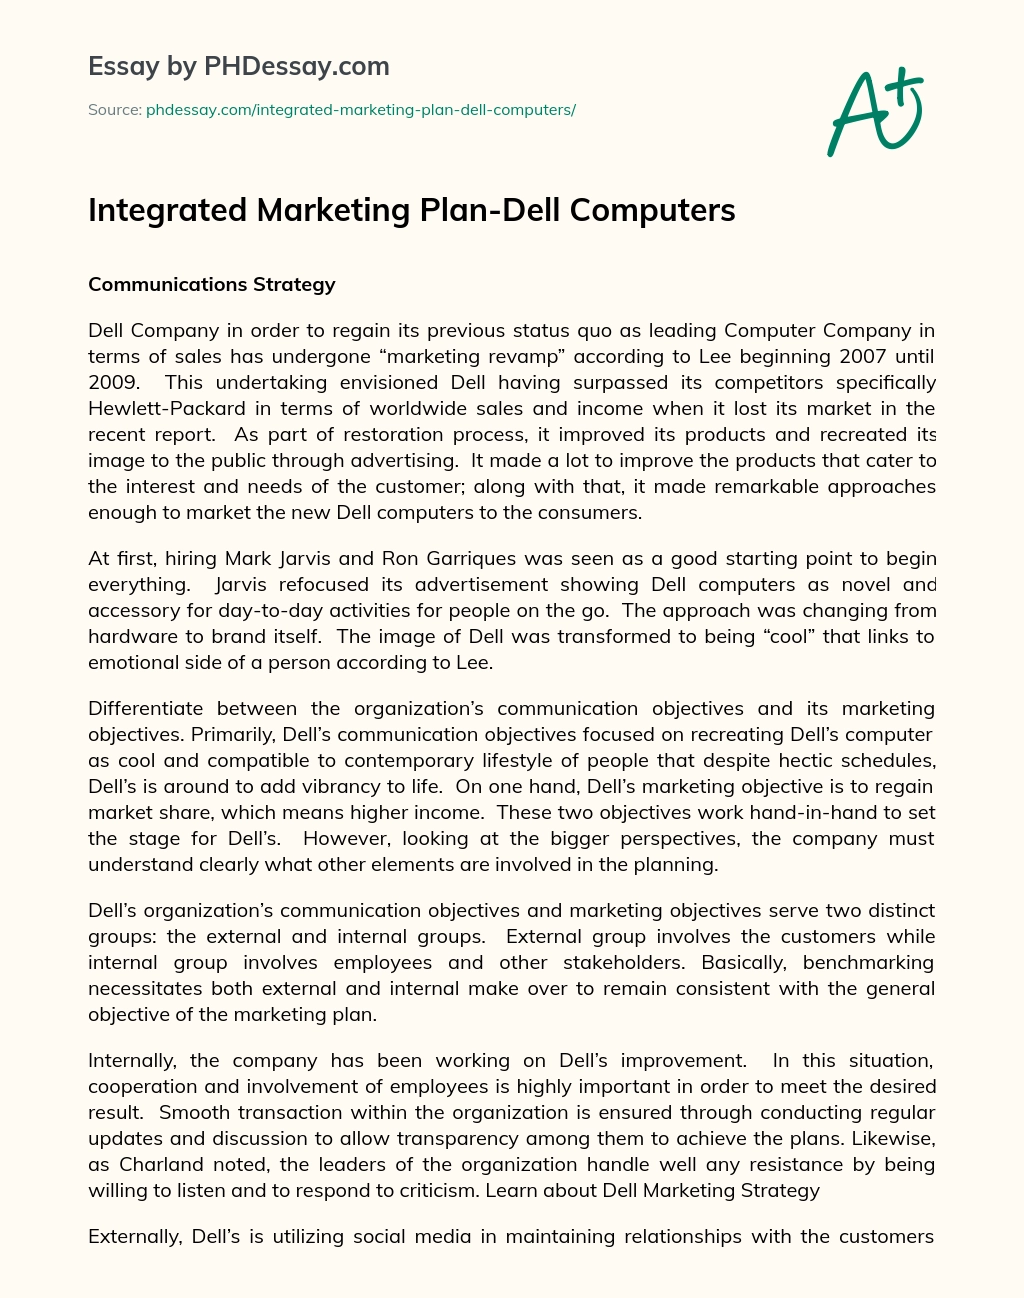 Integrated Marketing Plan-Dell Computers essay